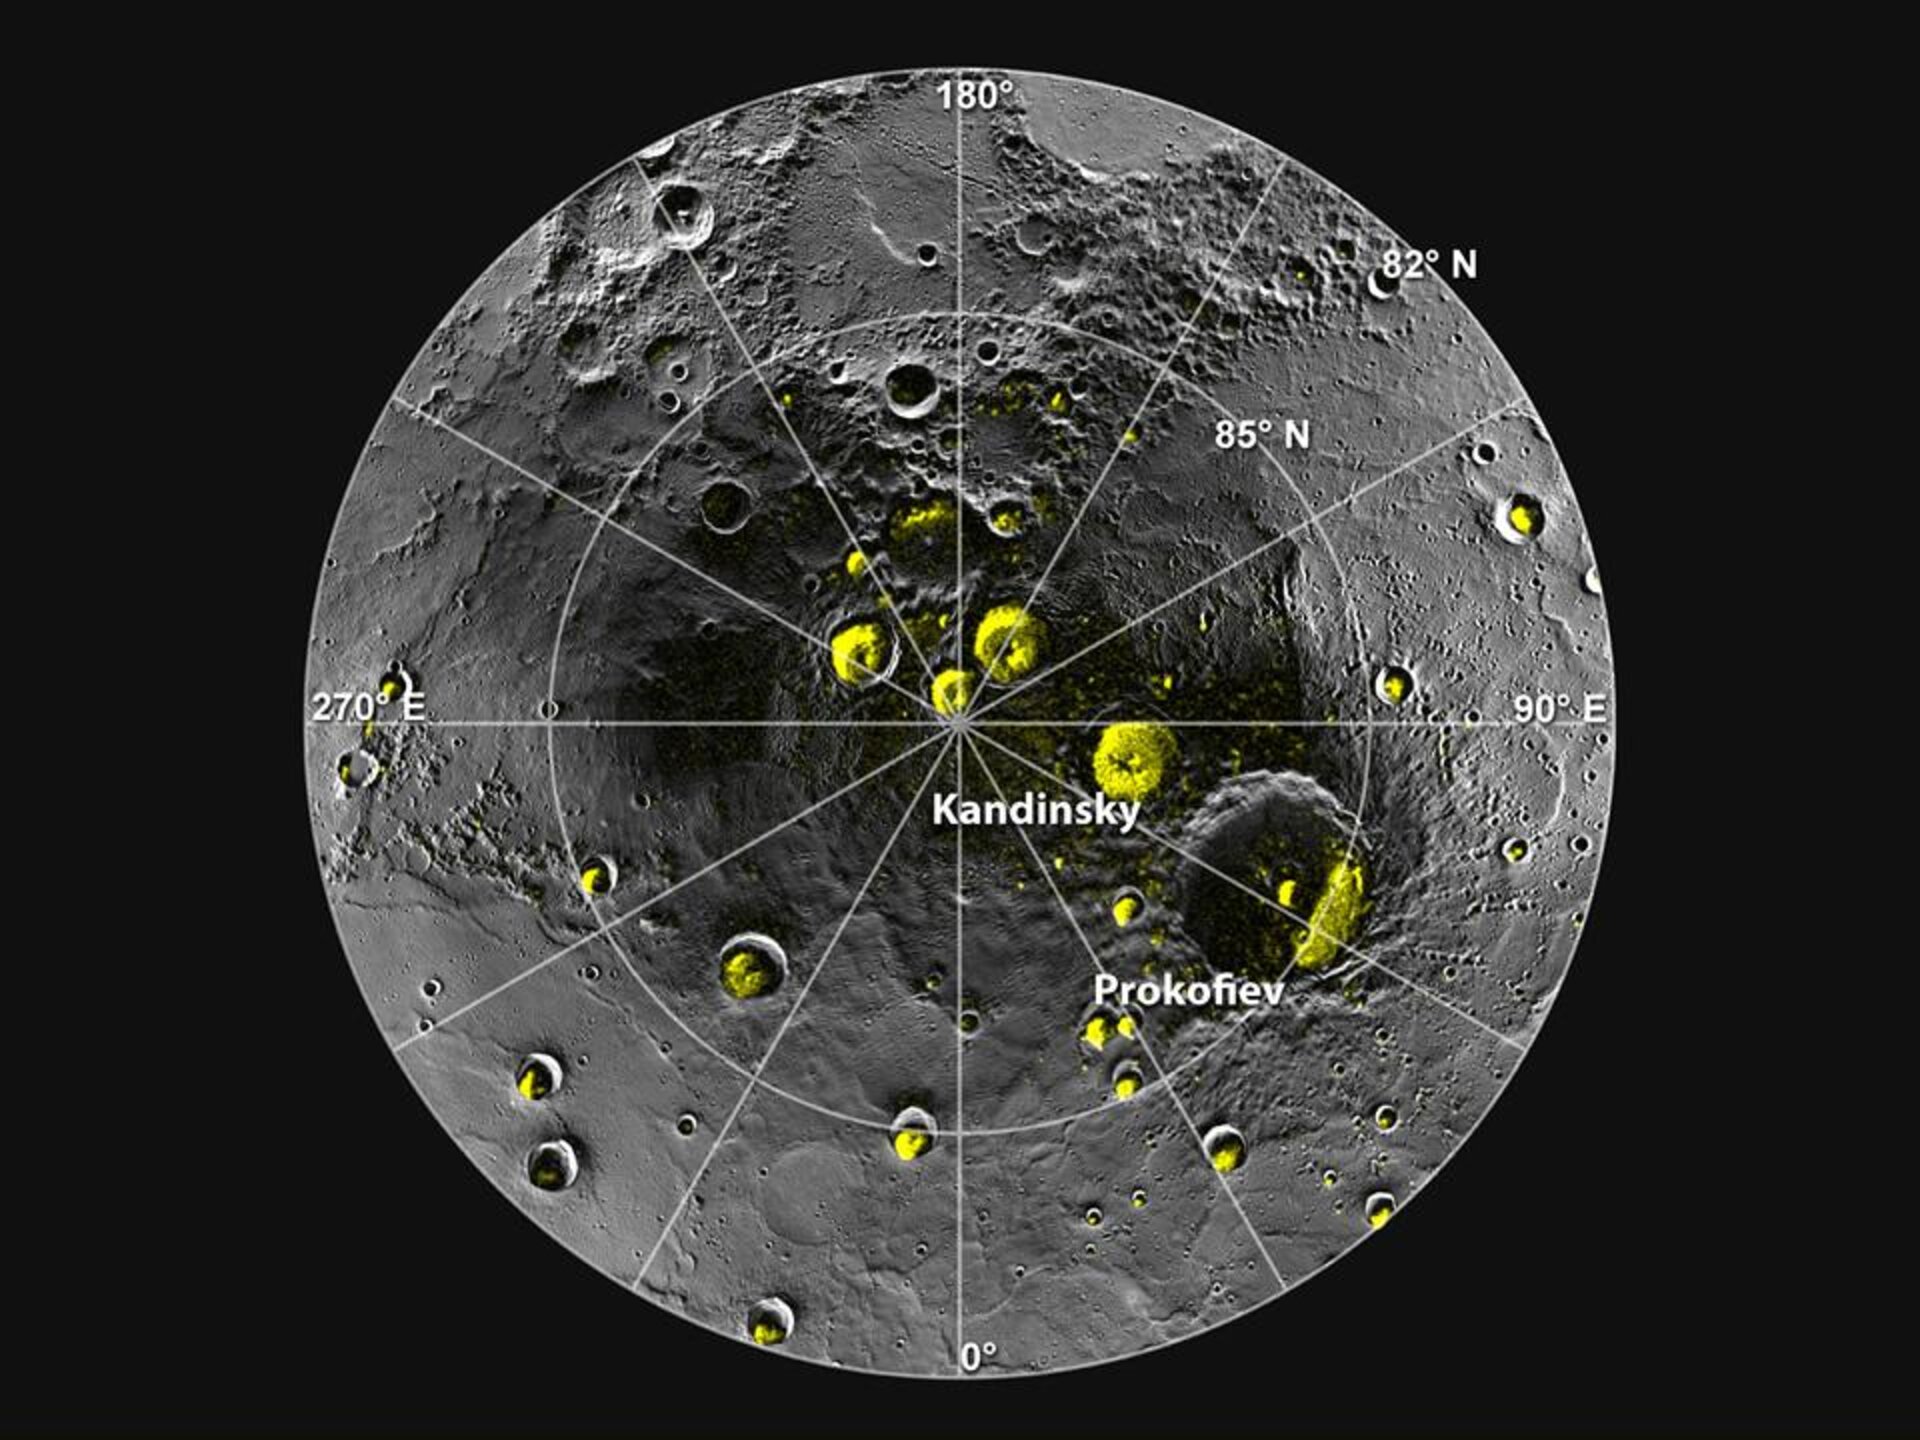 NASA's MESSENGER mission found evidence that there might be water ice in the polar craters of Mercury